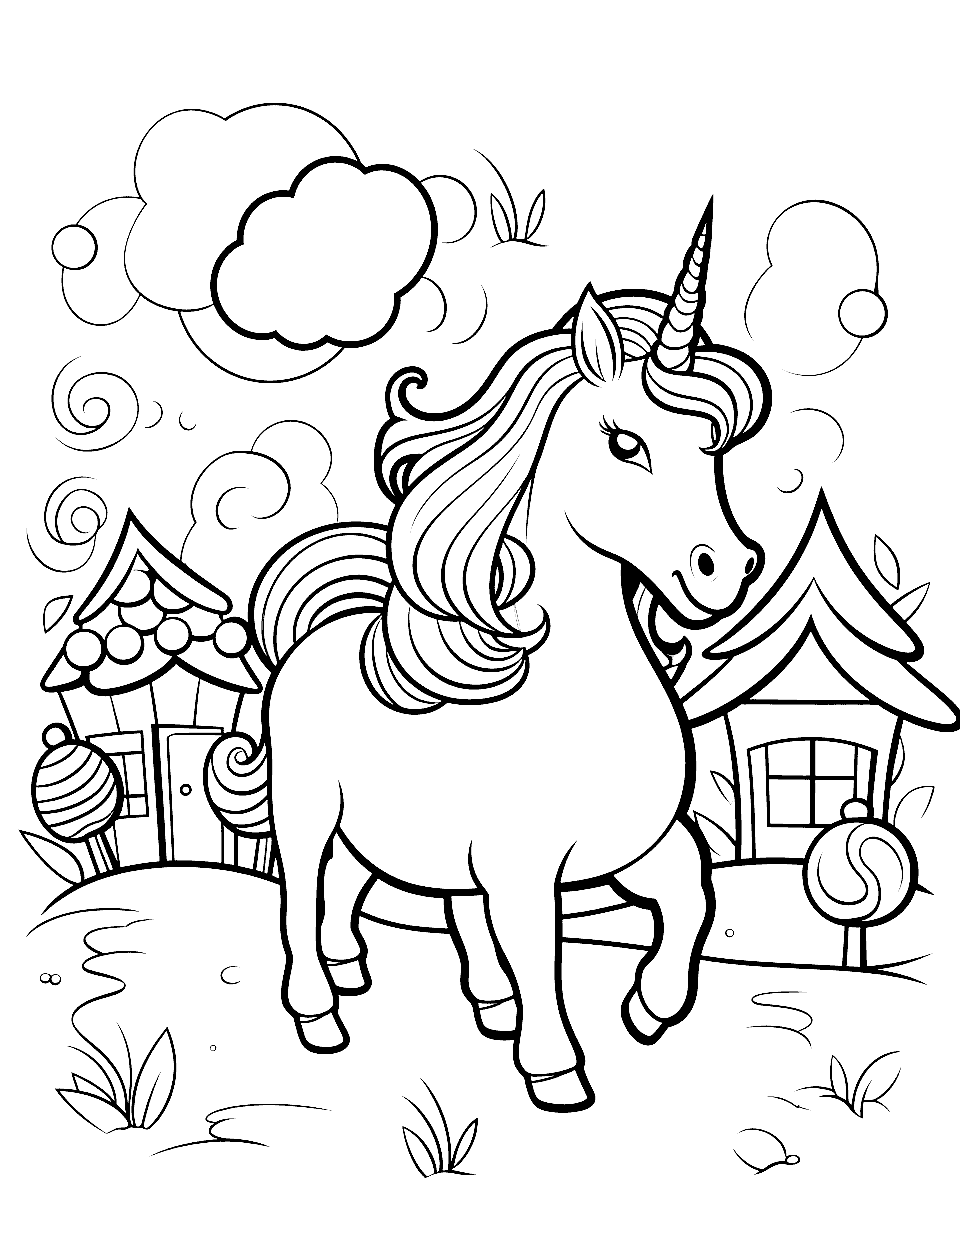 Unicorn and Candy Land Coloring Page - A unicorn prancing around in Candy Land, surrounded by candy canes, lollipops, and gingerbread houses.